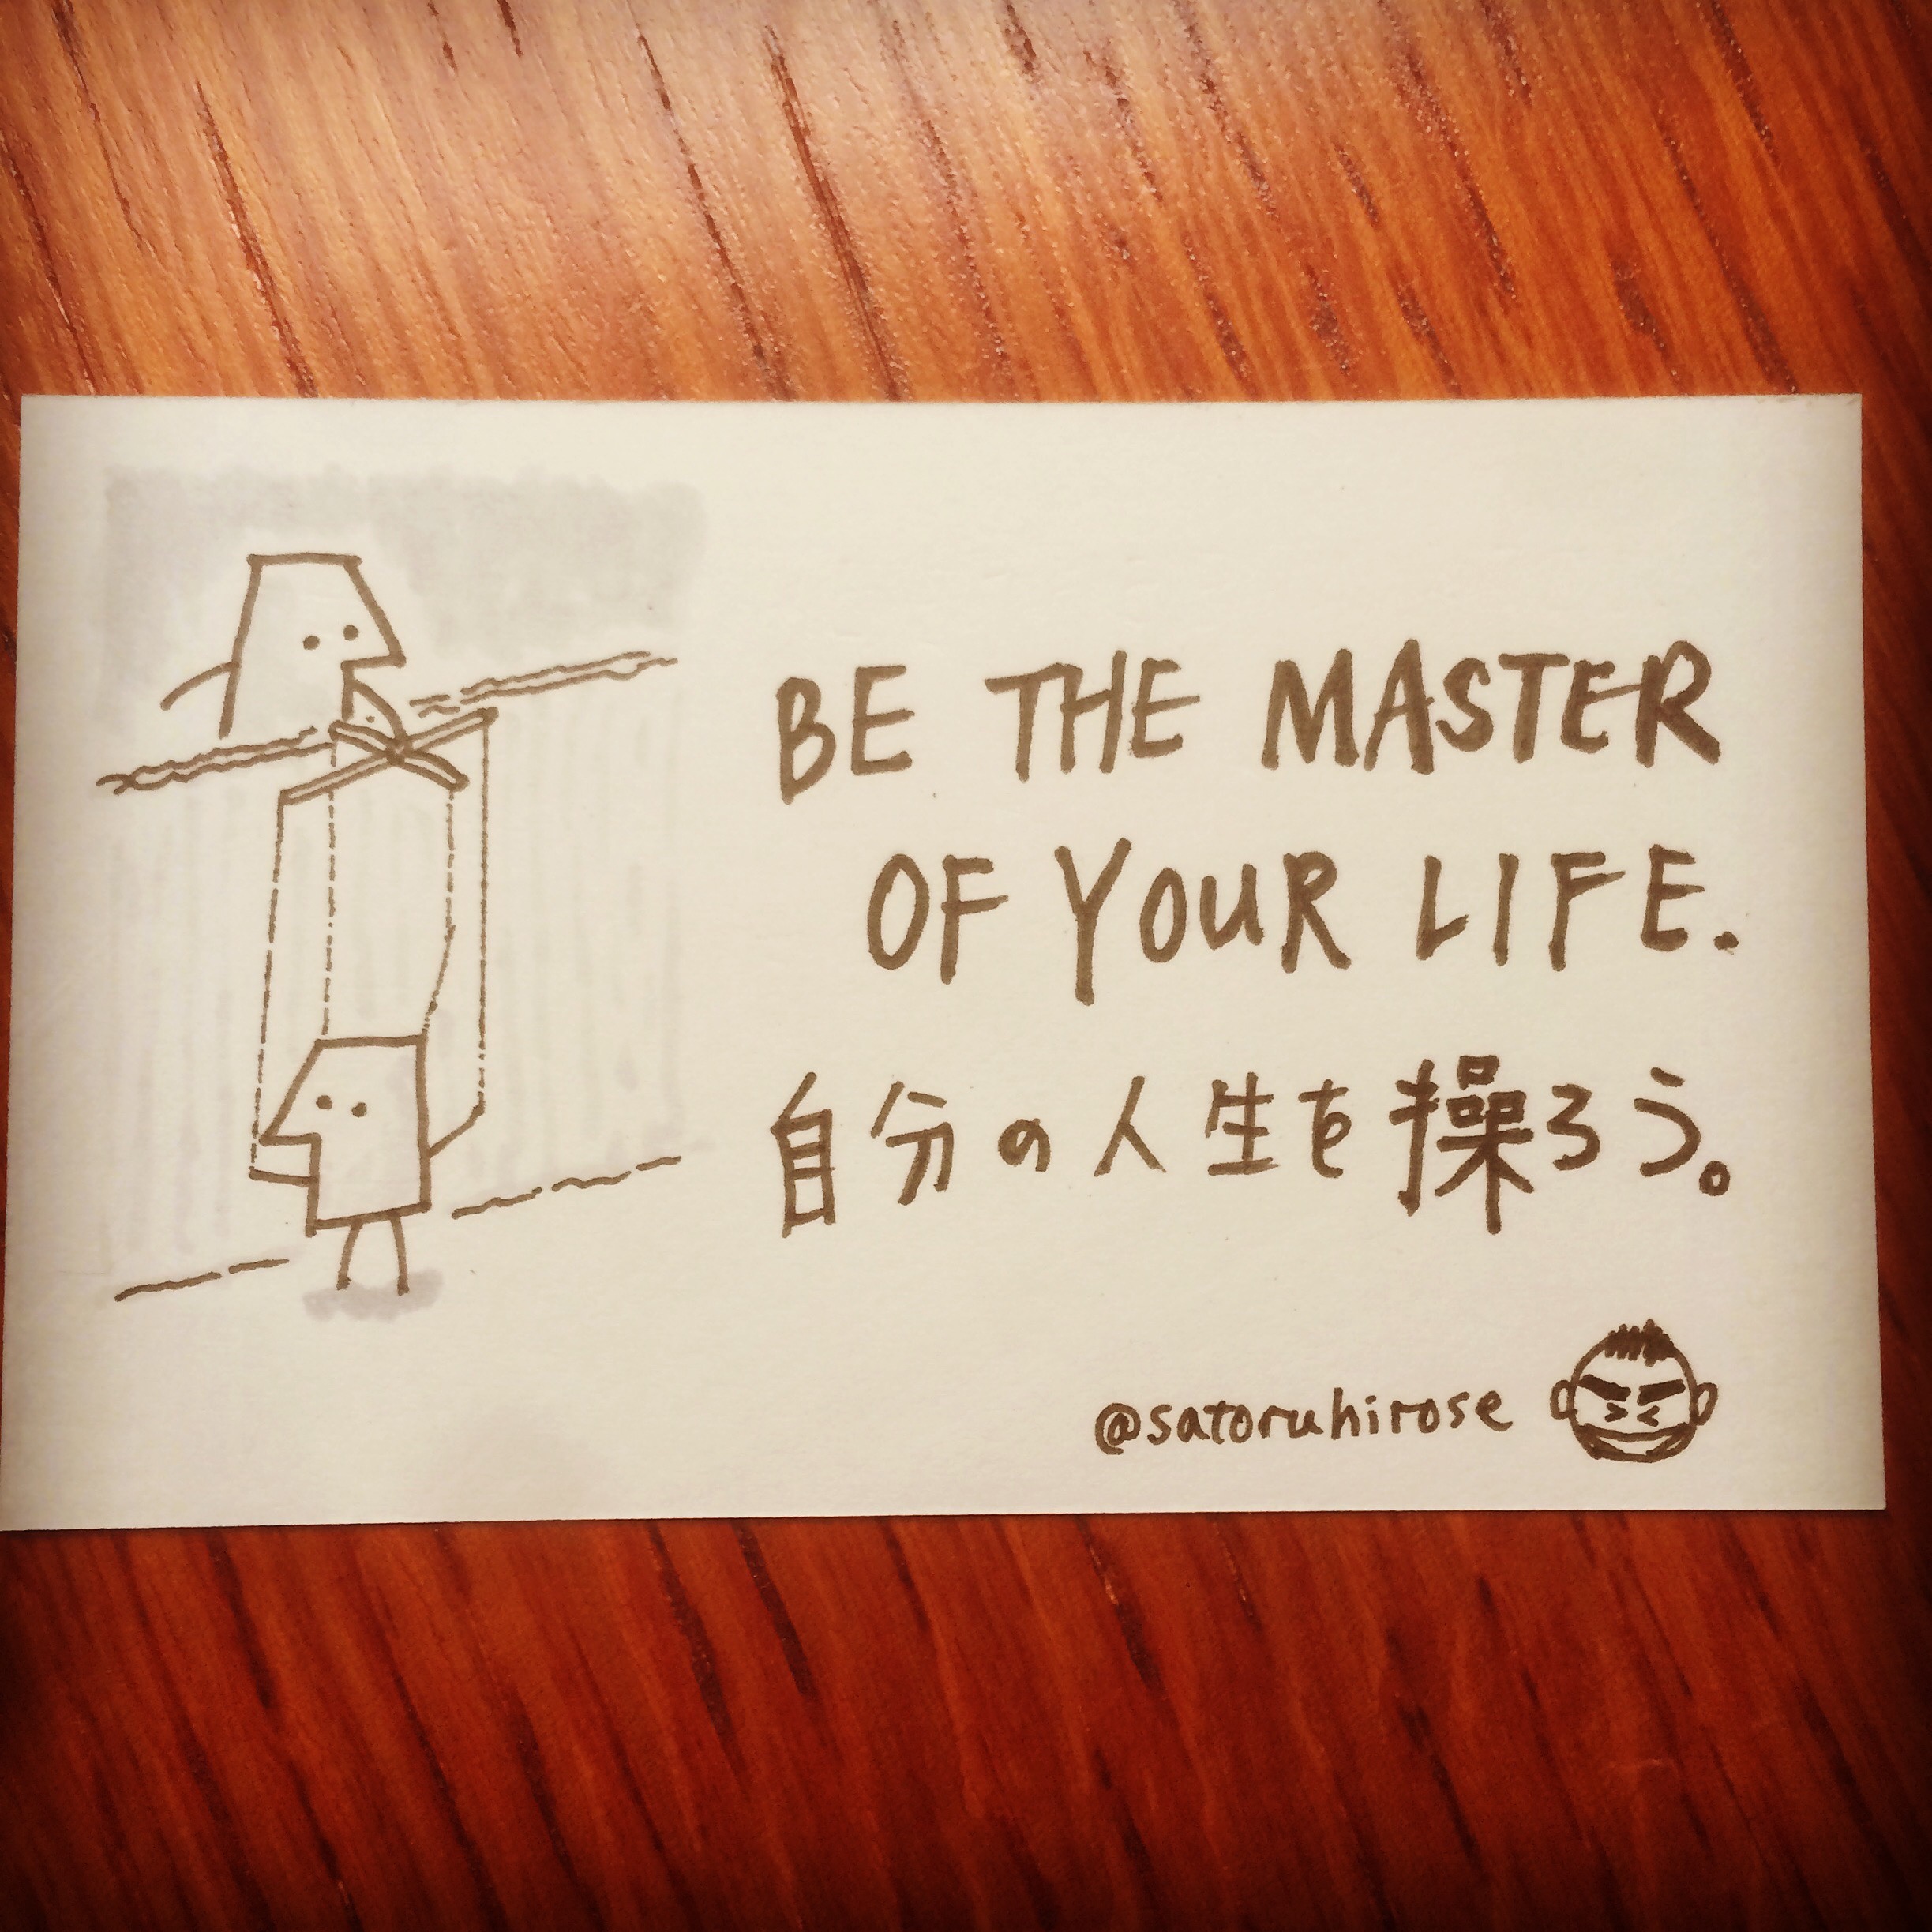 Be the master of your life.